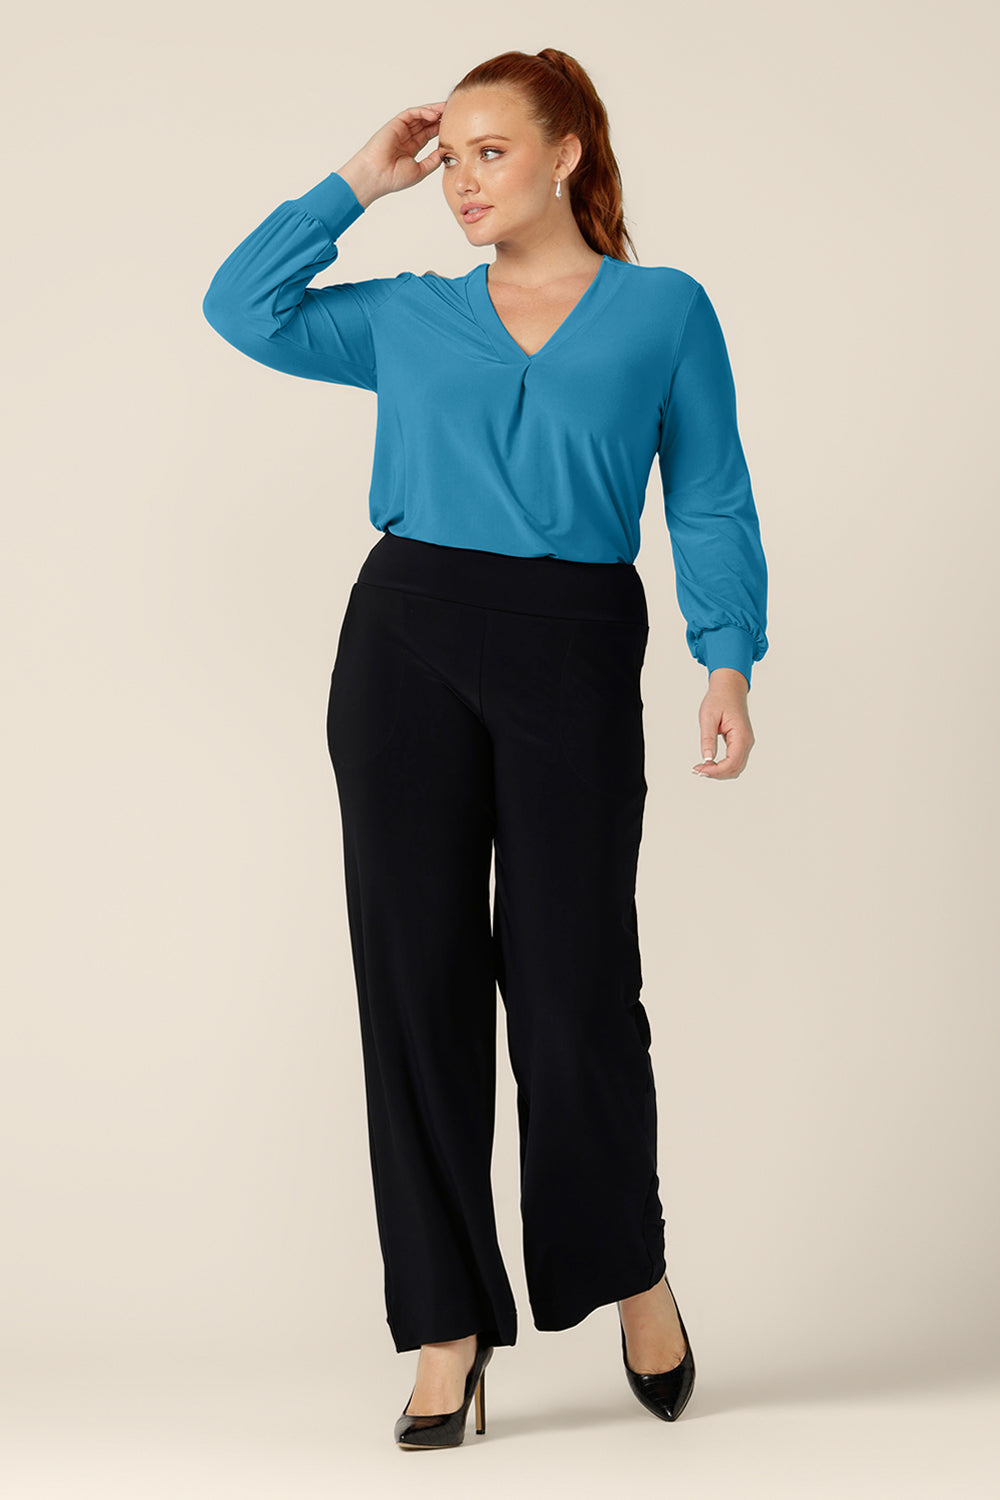 A curvy woman wears a V-neck top with long bishop sleeves in Opal blue stretch jersey. Made in Australia by Australian and New Zealand women's clothing label, L&F, this work wear top is worn with navy blue, straight leg pants for a chic work wear outfit.